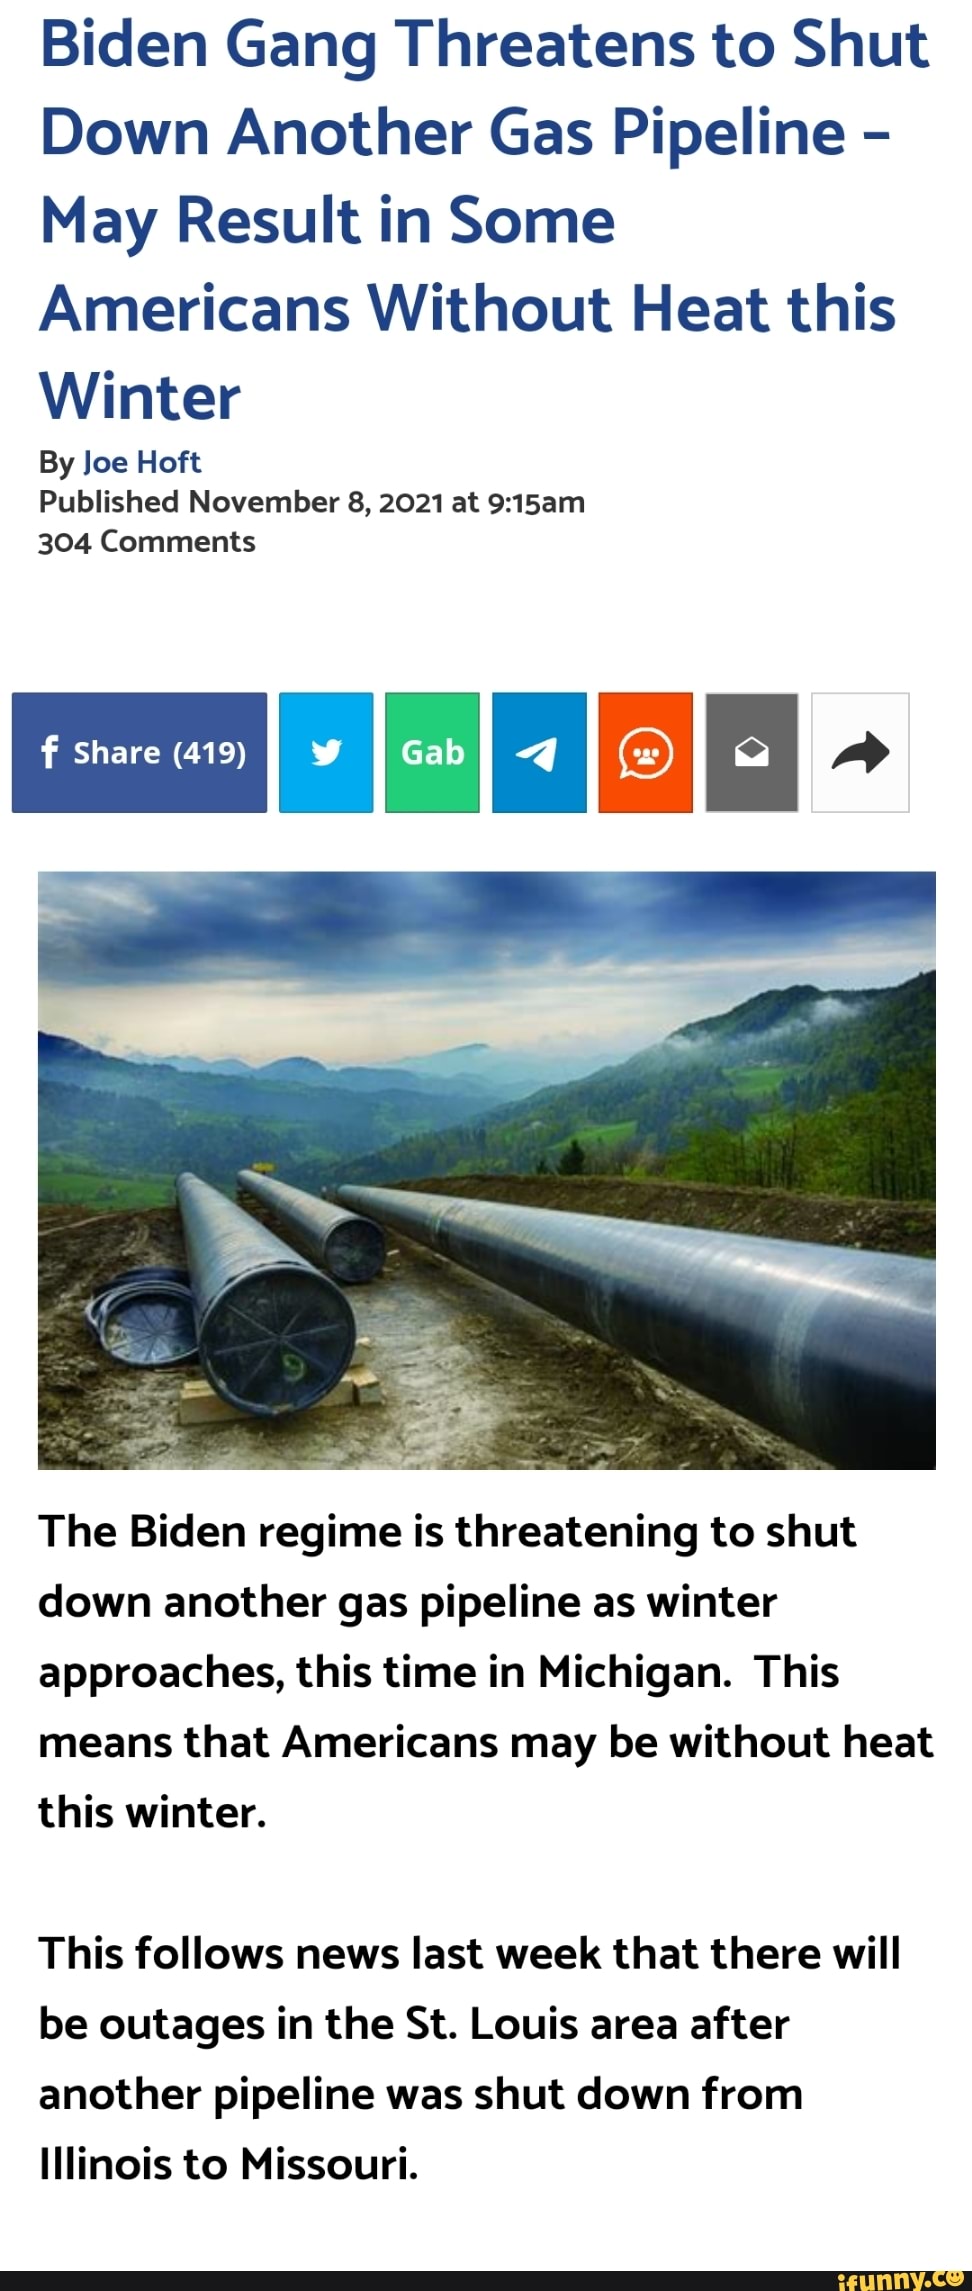 Biden Gang Threatens to Shut Down Another Gas Pipeline May Result in